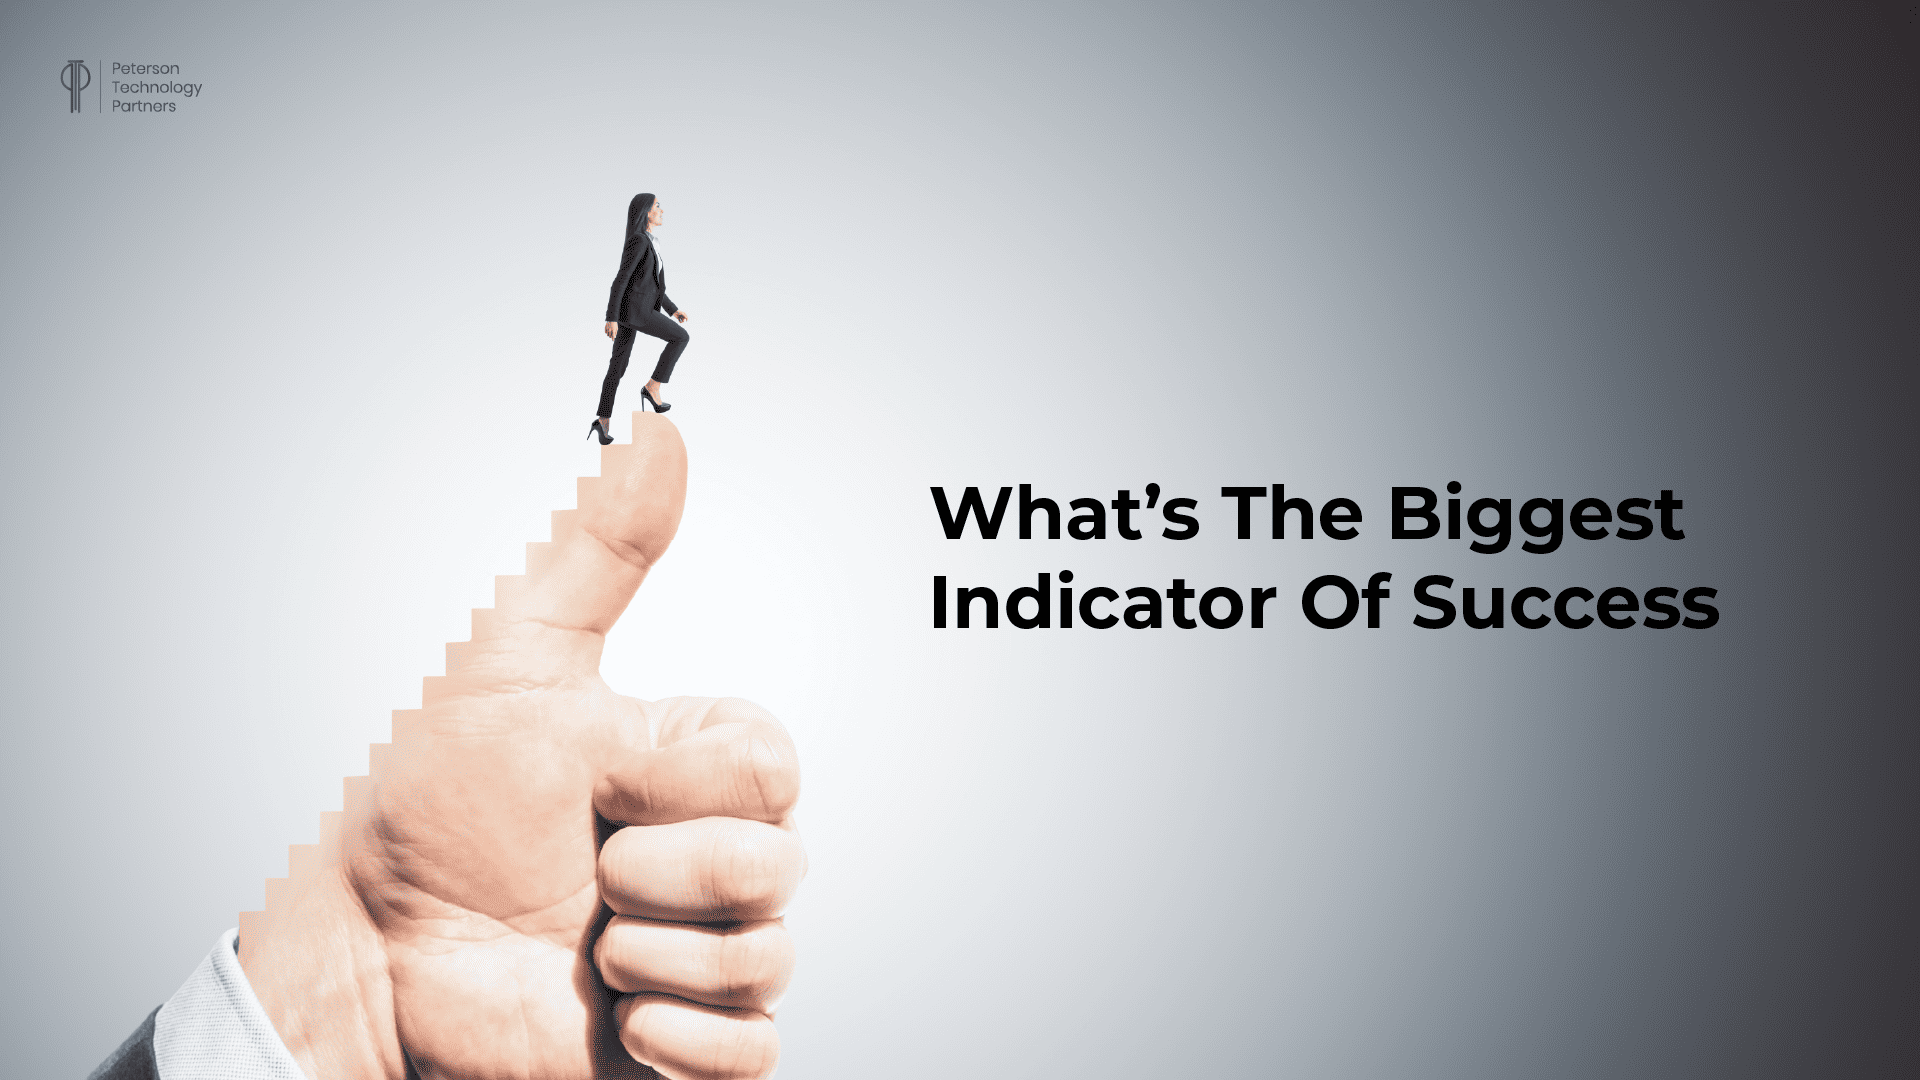 What’s the Biggest Indicator of Success